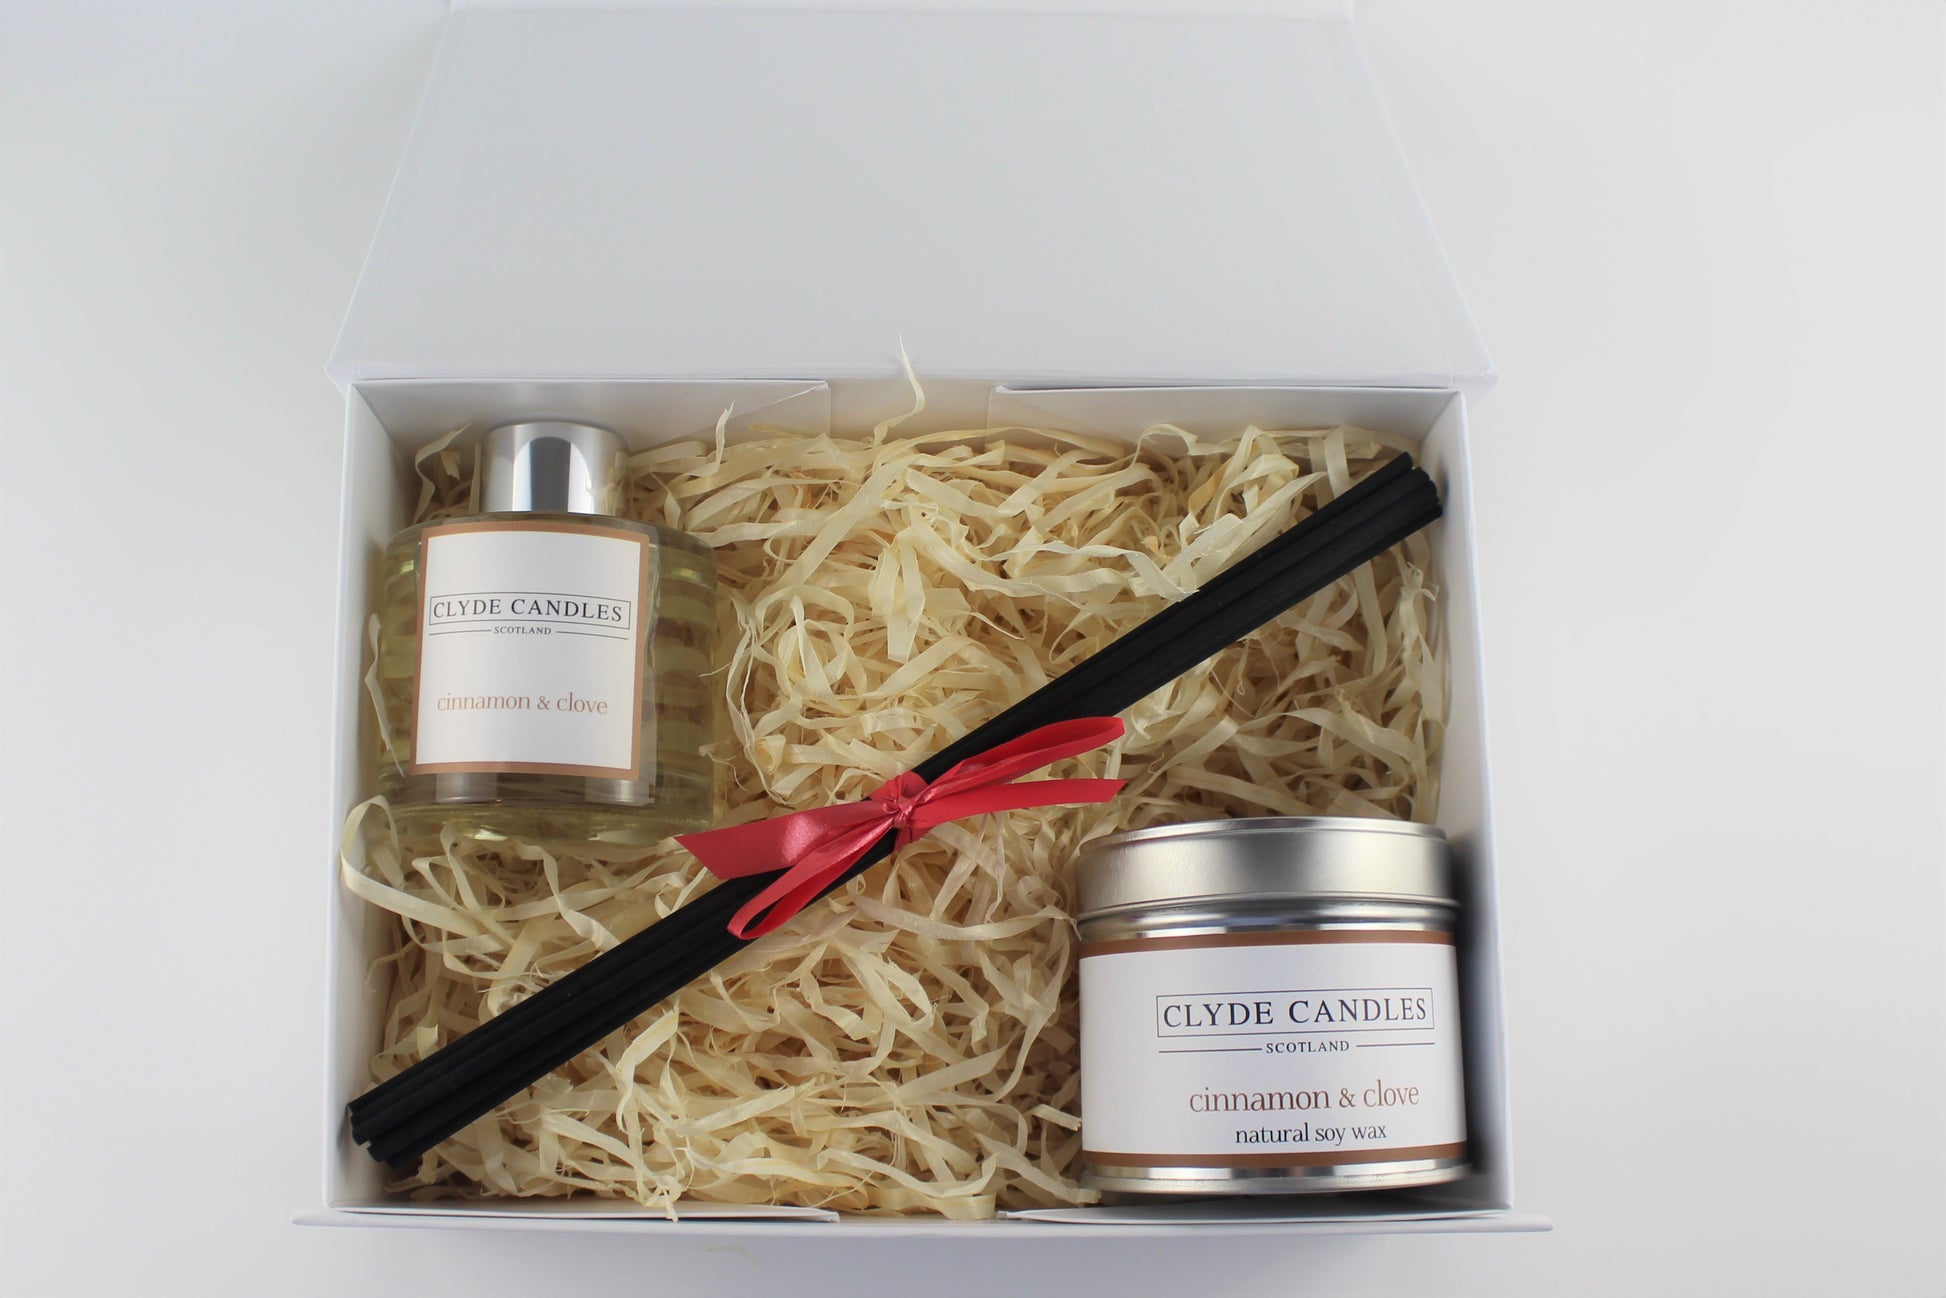 Cinnamon & Clove Diffuser & Candle Gift Box Set - Scottish Natural Soy Candle